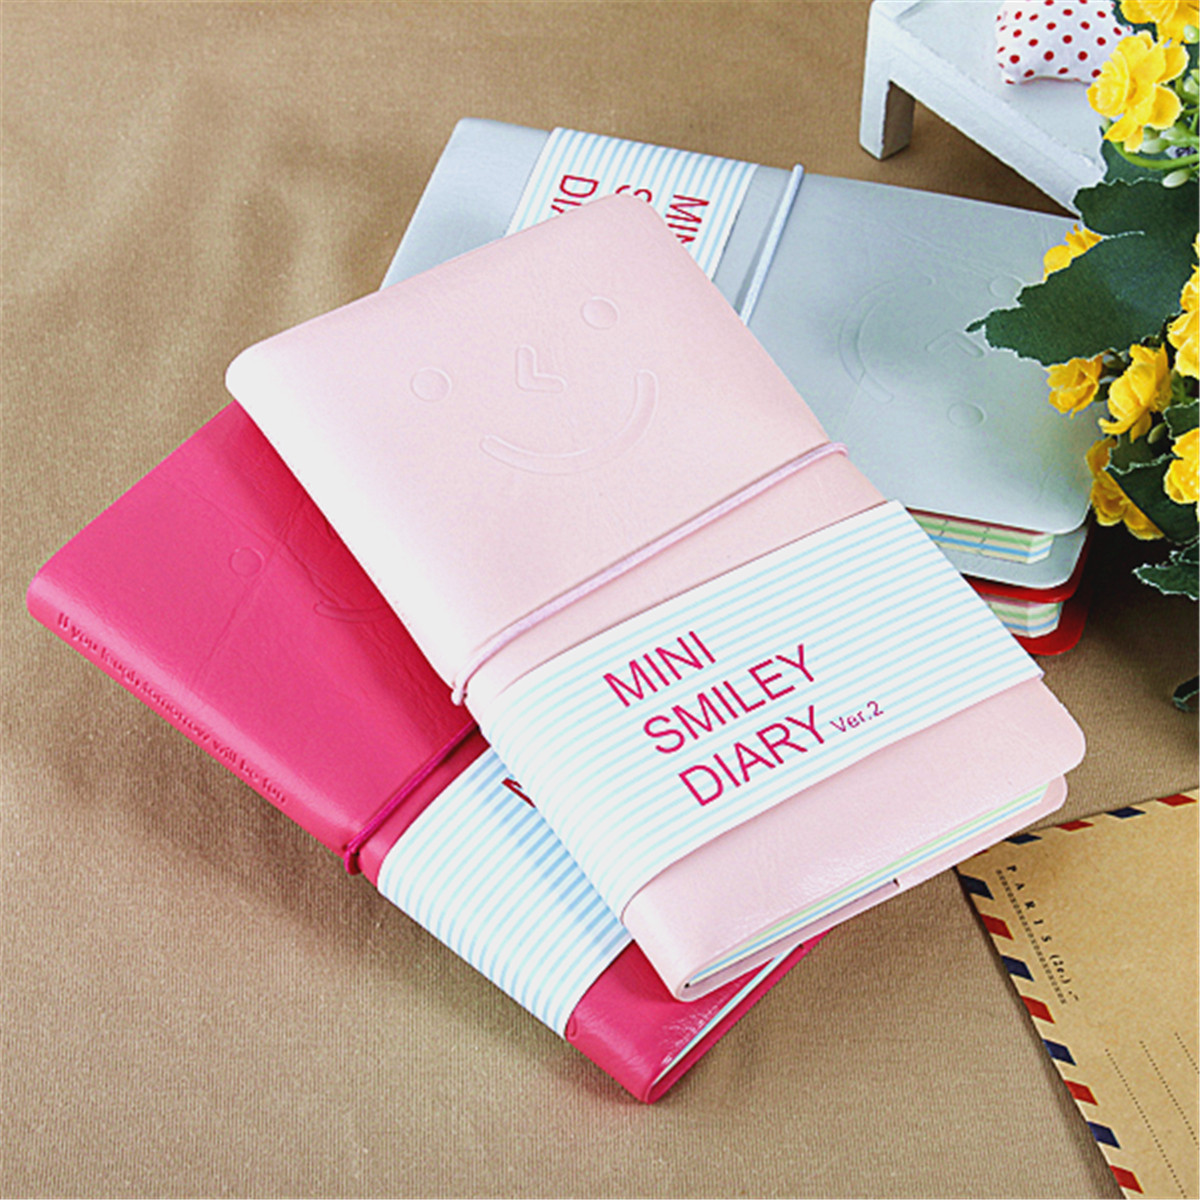 Candy-Colors-Charming-Smiley-Paper-Diary-Notebook-Memo-Book-leather-Note-Pads-Stationery-Pocketbook-1247985-2